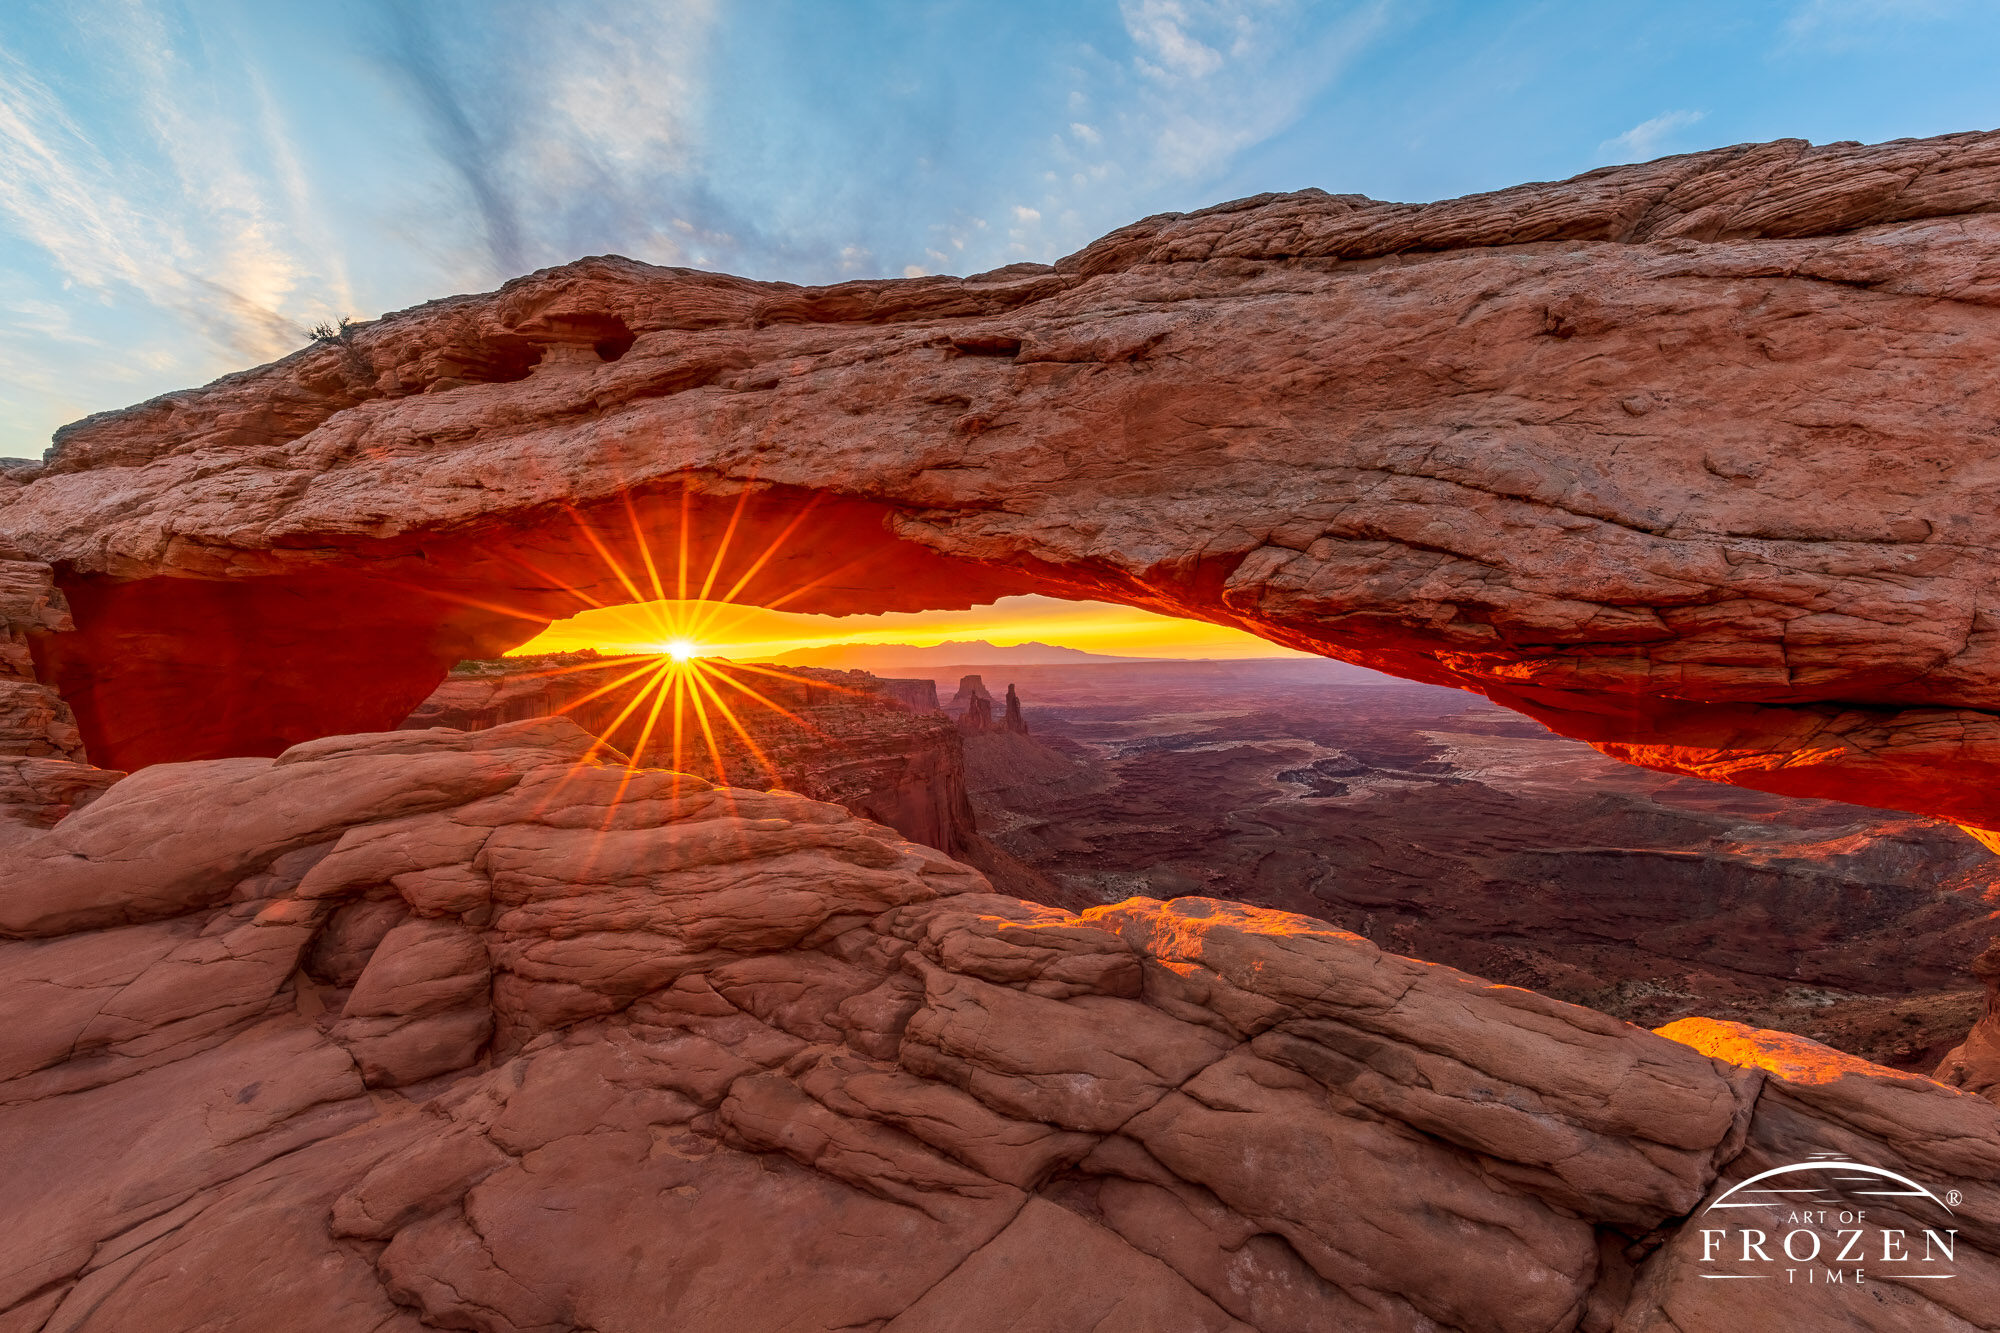 A sunrise as viewed through Mesa Arch where the warm orange colors paint the underside of the rock arch